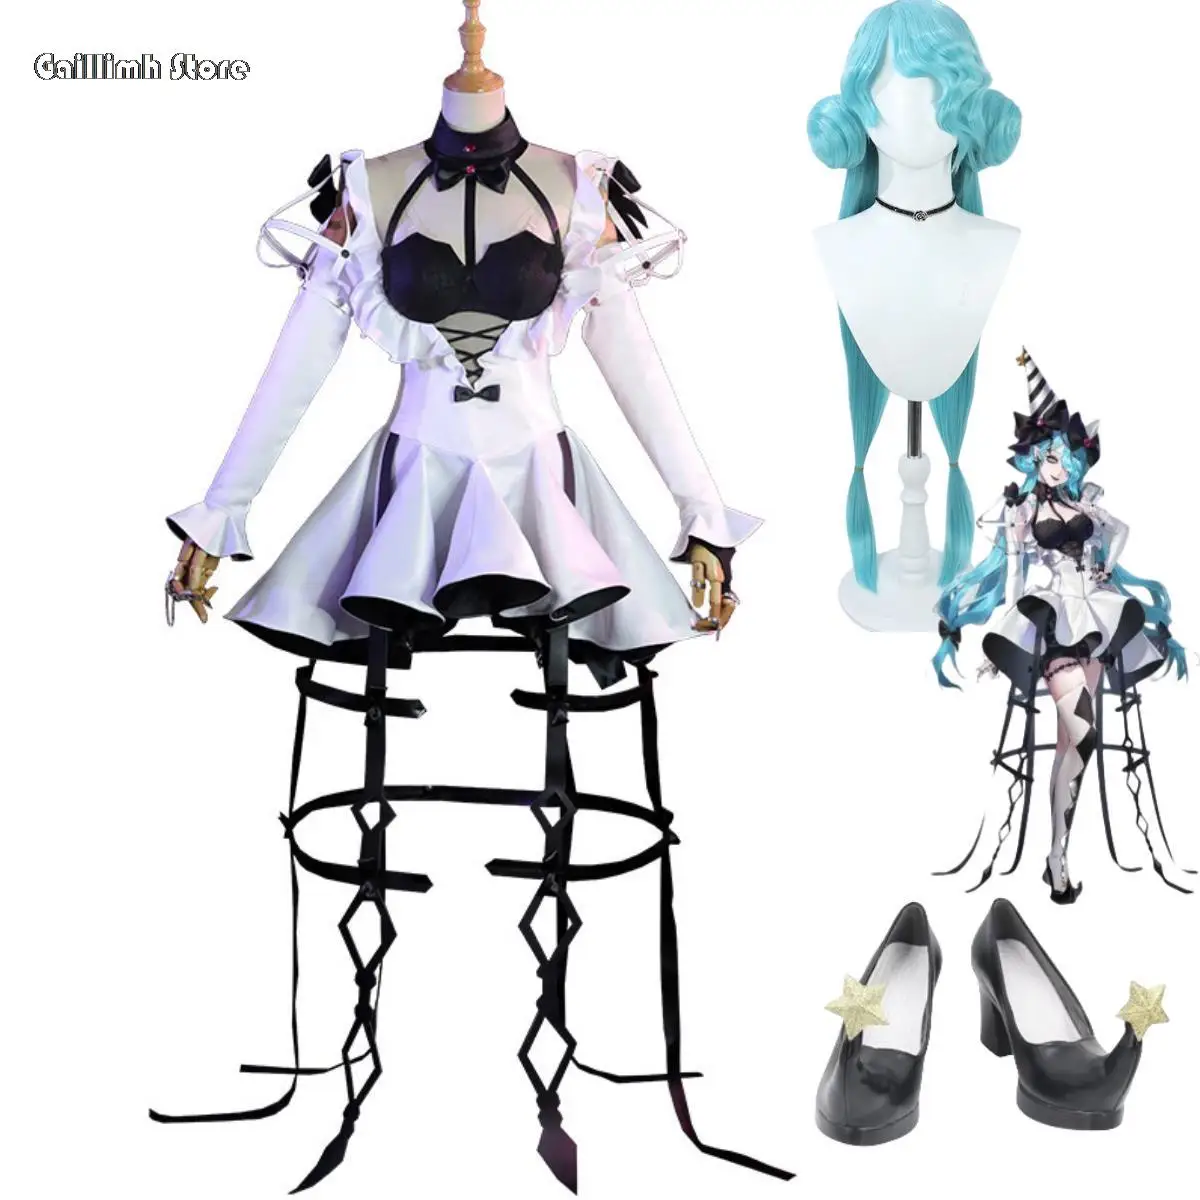 

Anime Game Path To Nowhere Serpent Cosplay Costume Wig Clown Dress Lolita Shoes Woman Sexy Kawaii Masquerade Ball Halloweensuit